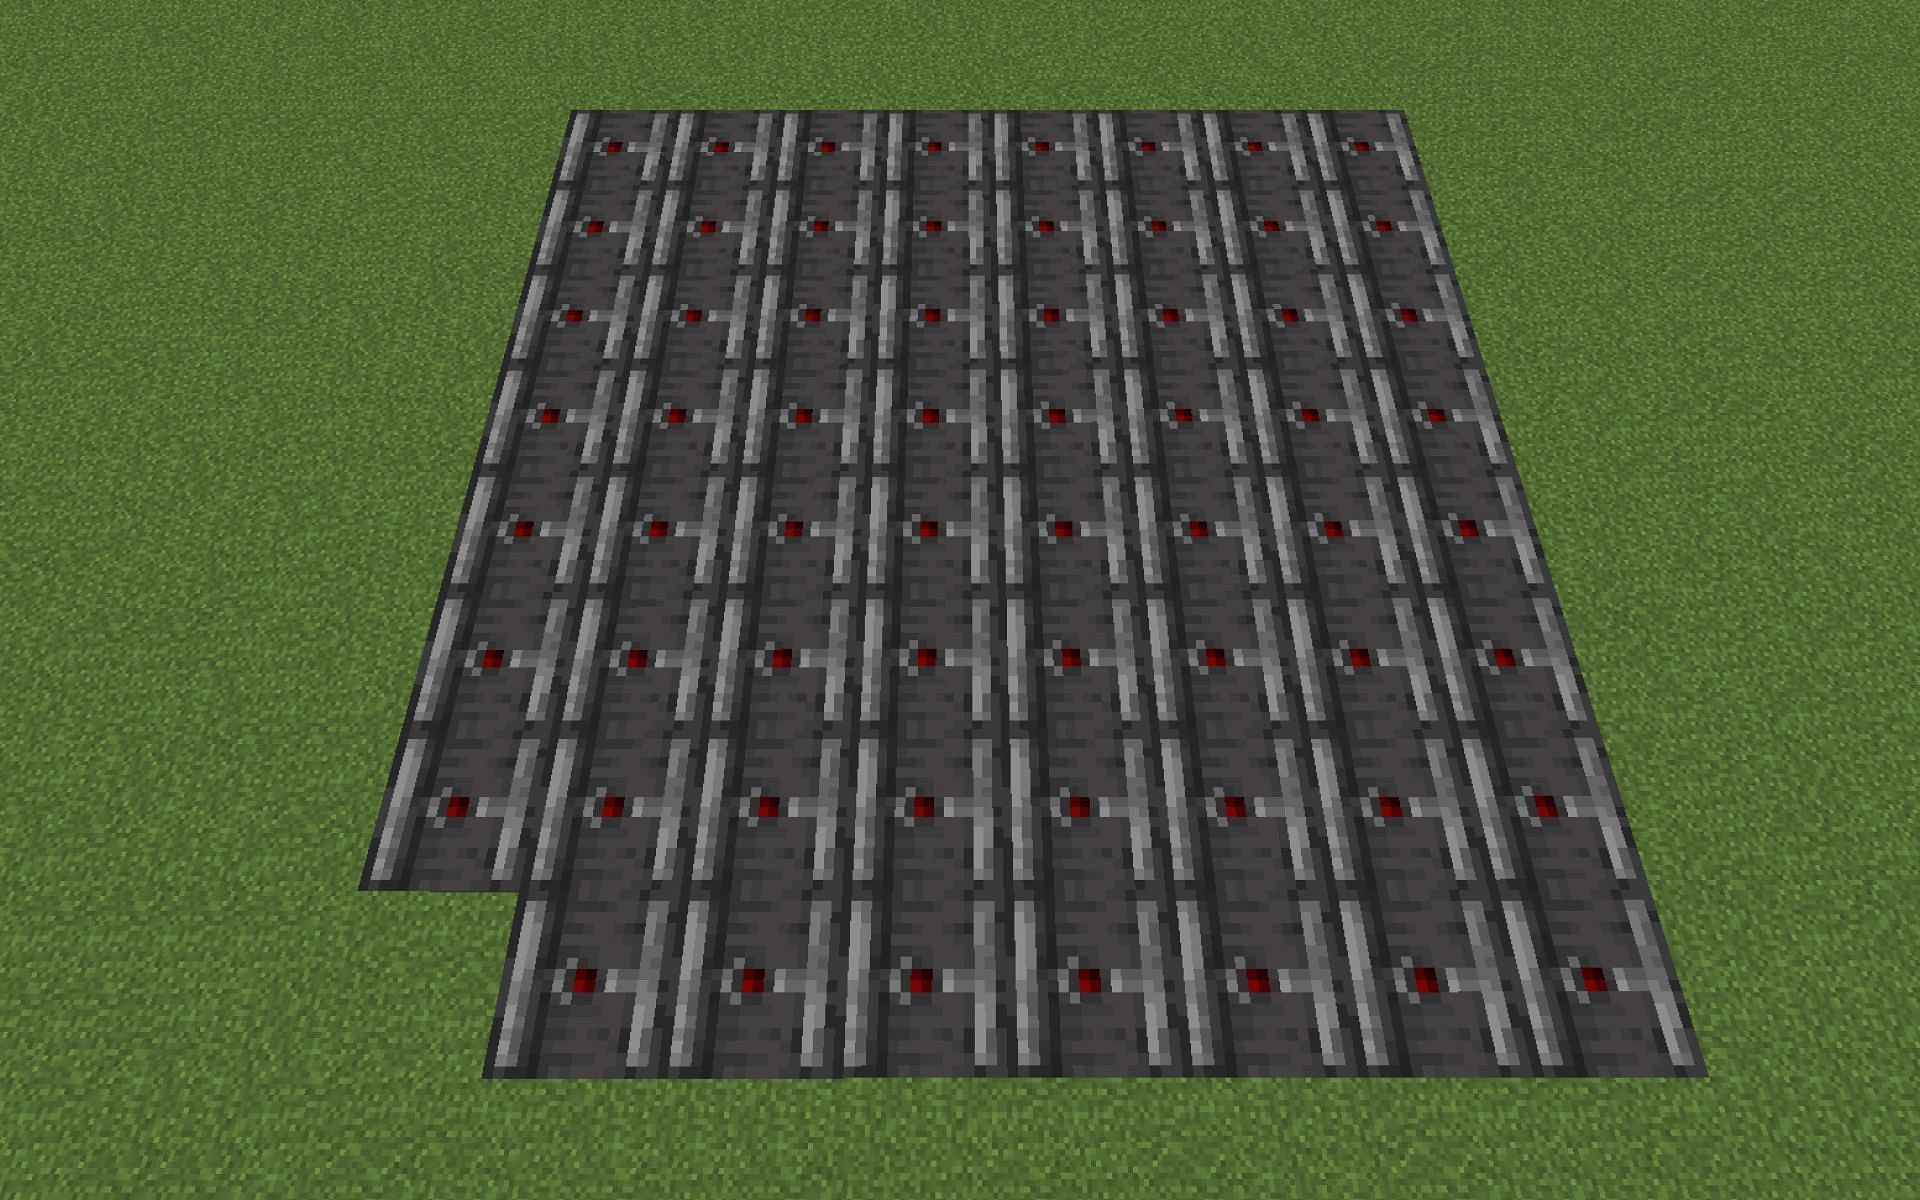 Observers and pistons make up the bulk of this lag machine design. Image via Minecraft